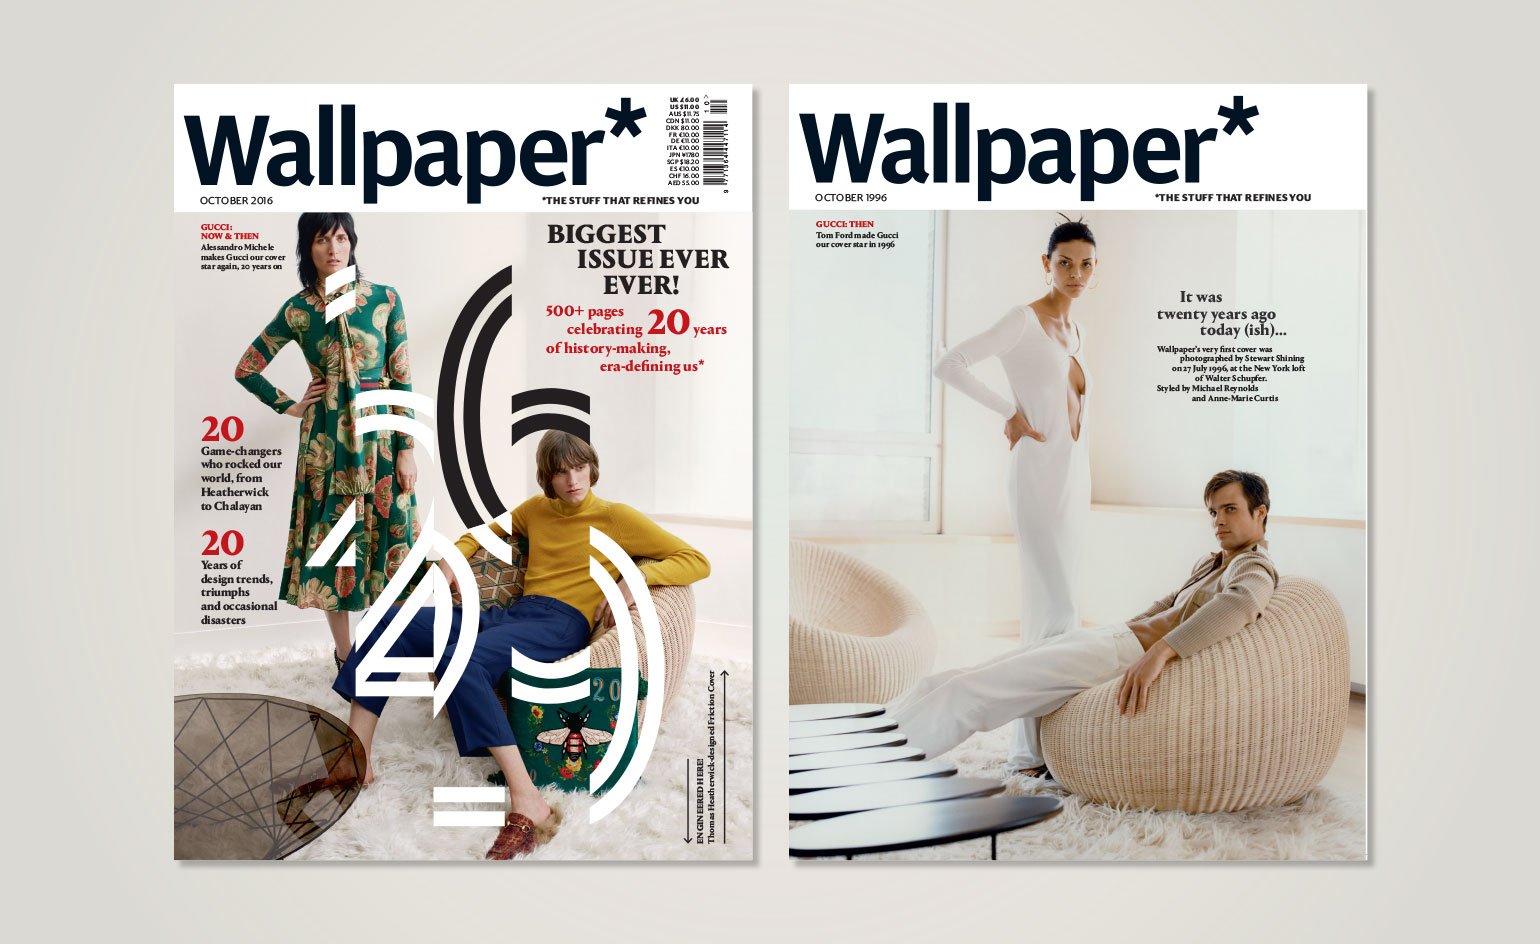 Wallpaper* on looking just as good in 2016 as on first 1996 cover: https://t.co/o6f4eJ6DeE https://t.co/0t5TPPr220" / Twitter